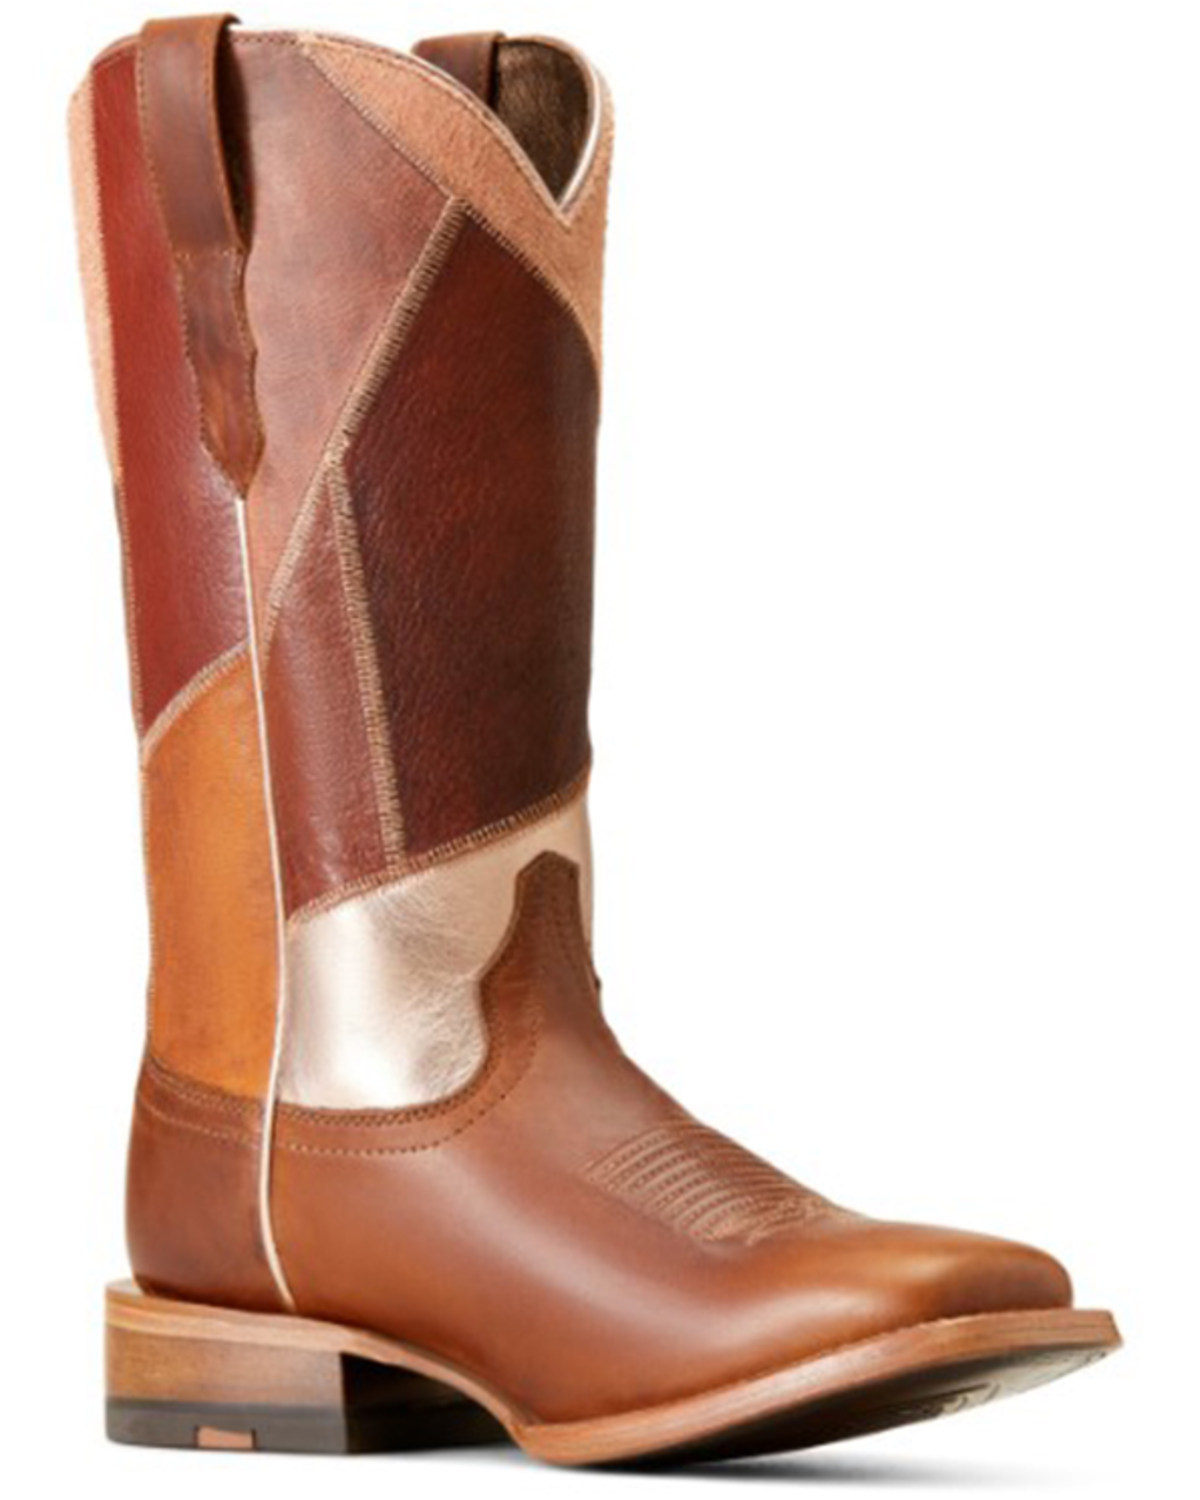 Ariat Women's Frontier Patchwork Western Boots - Broad Square Toe